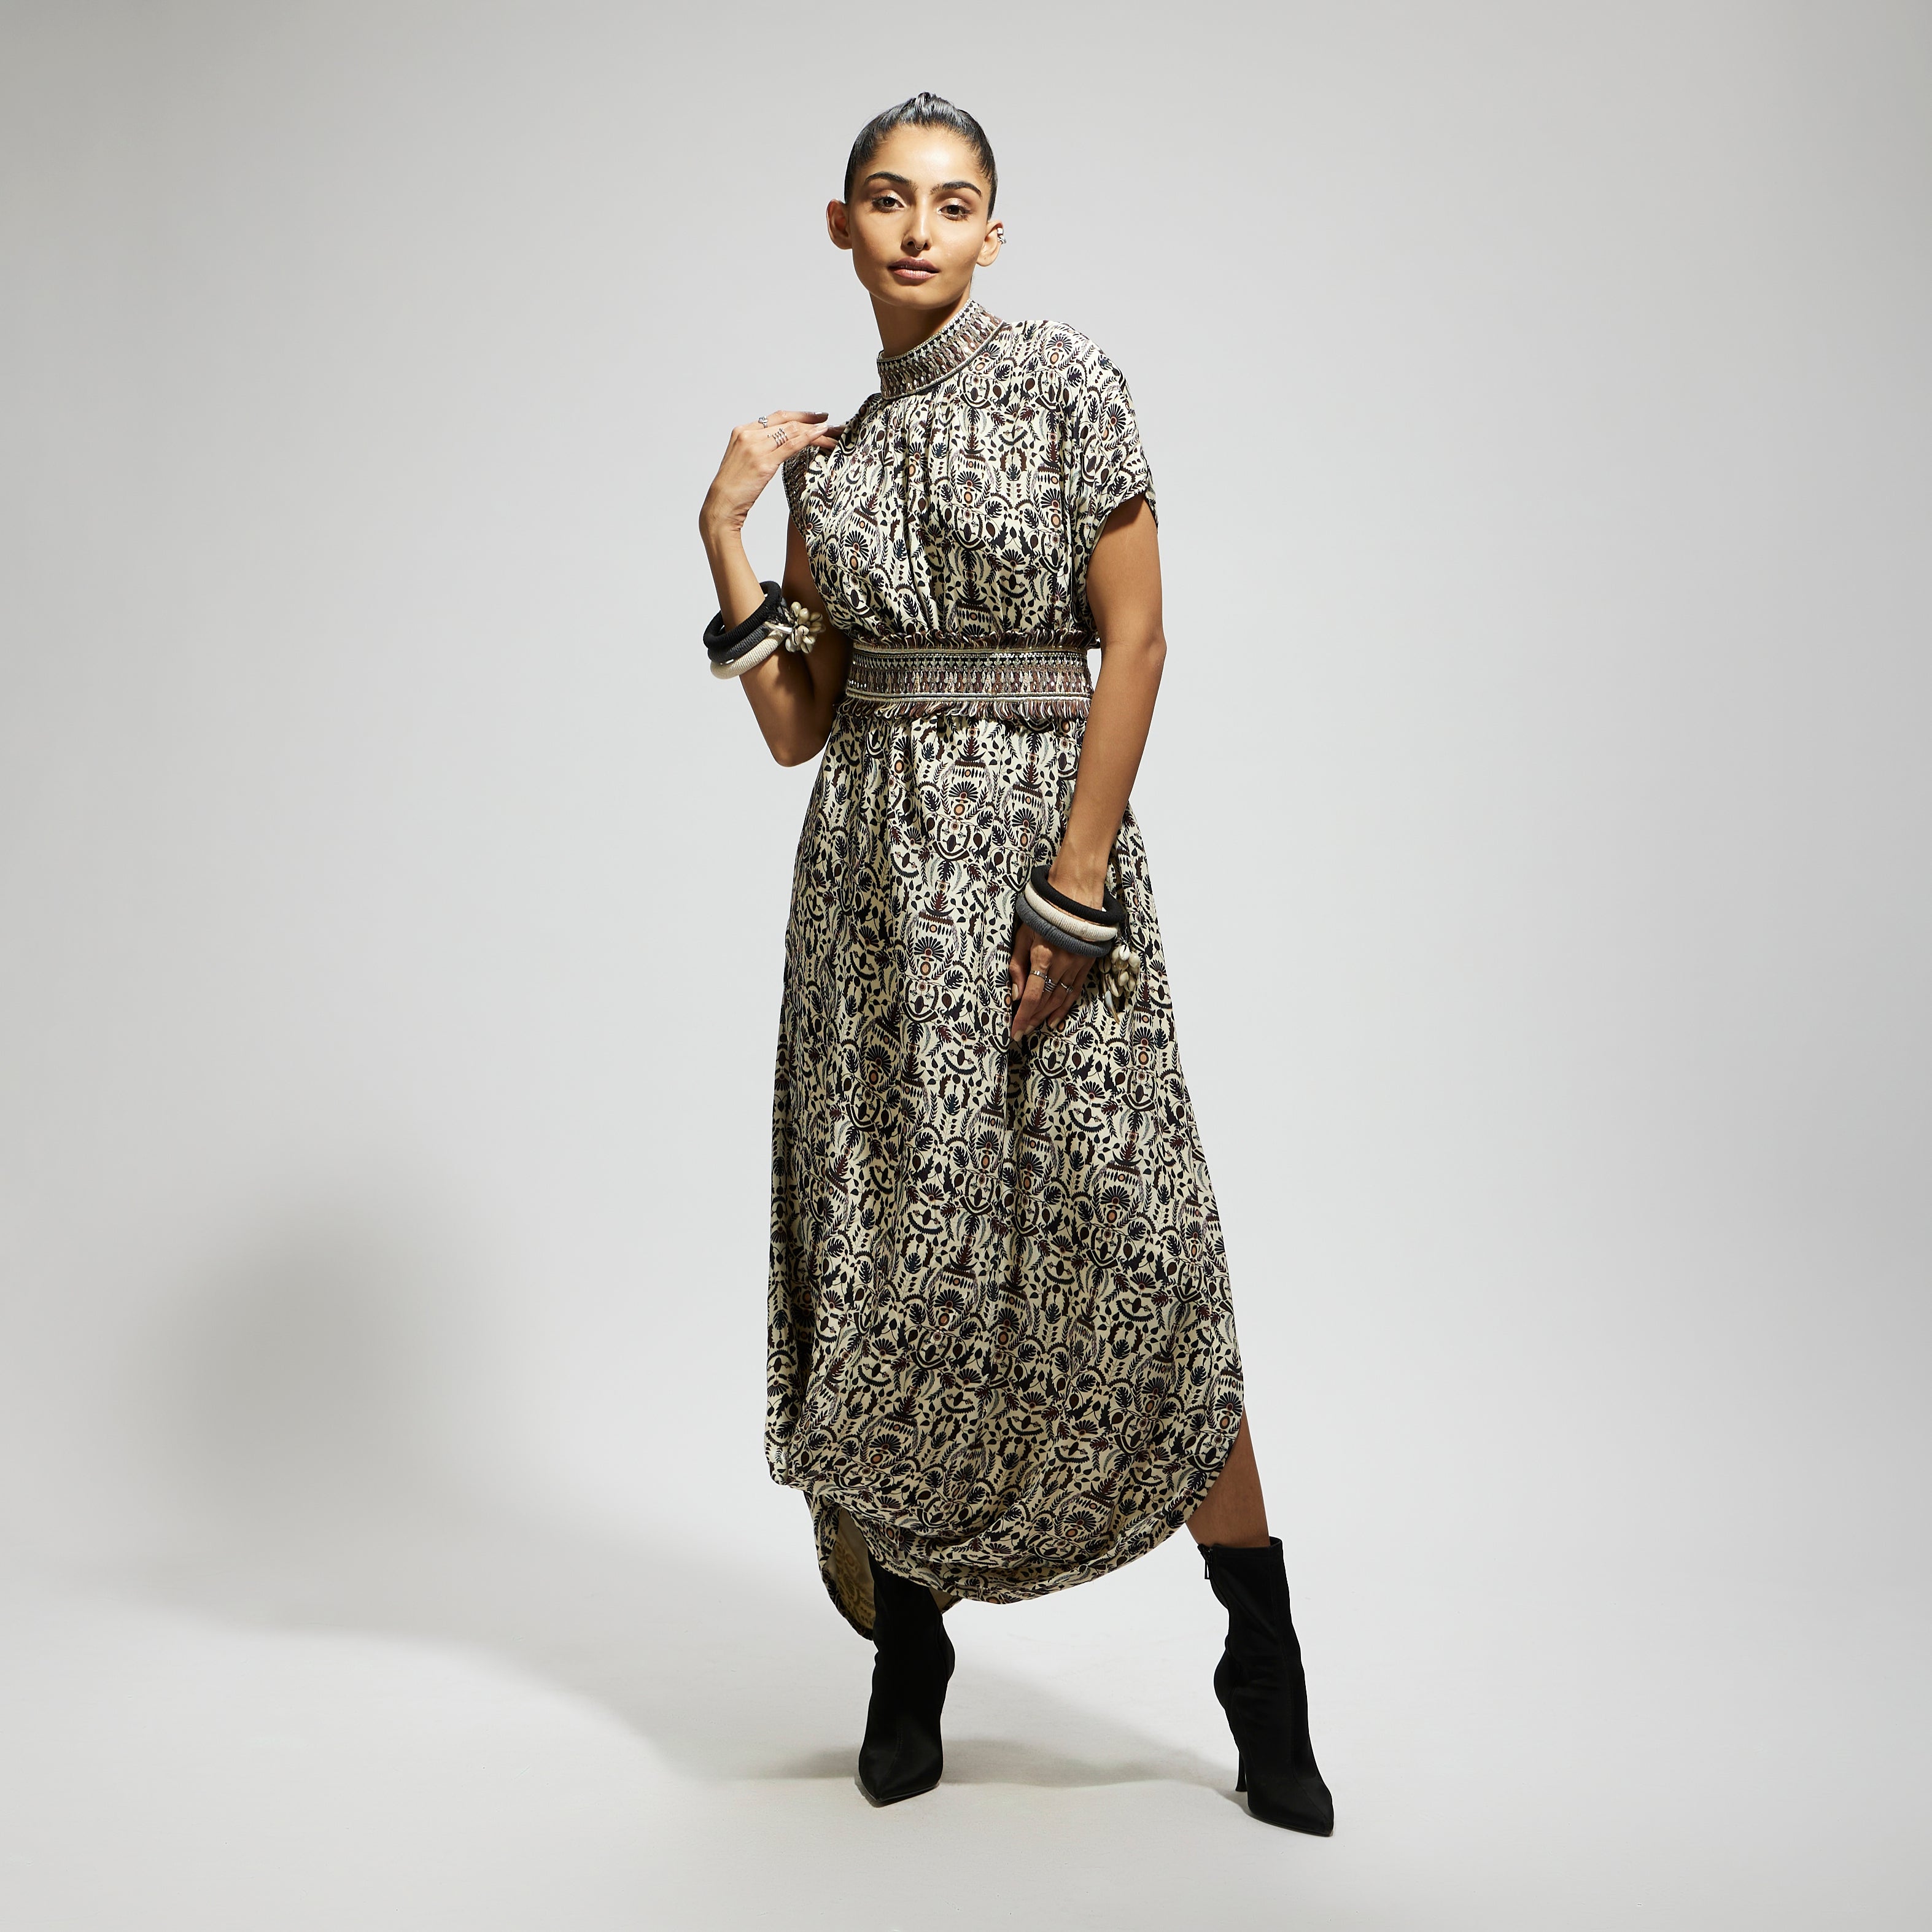 WHITE LEAF JAAL PRINTED COWL DRESS TEAMED WITH A BELT